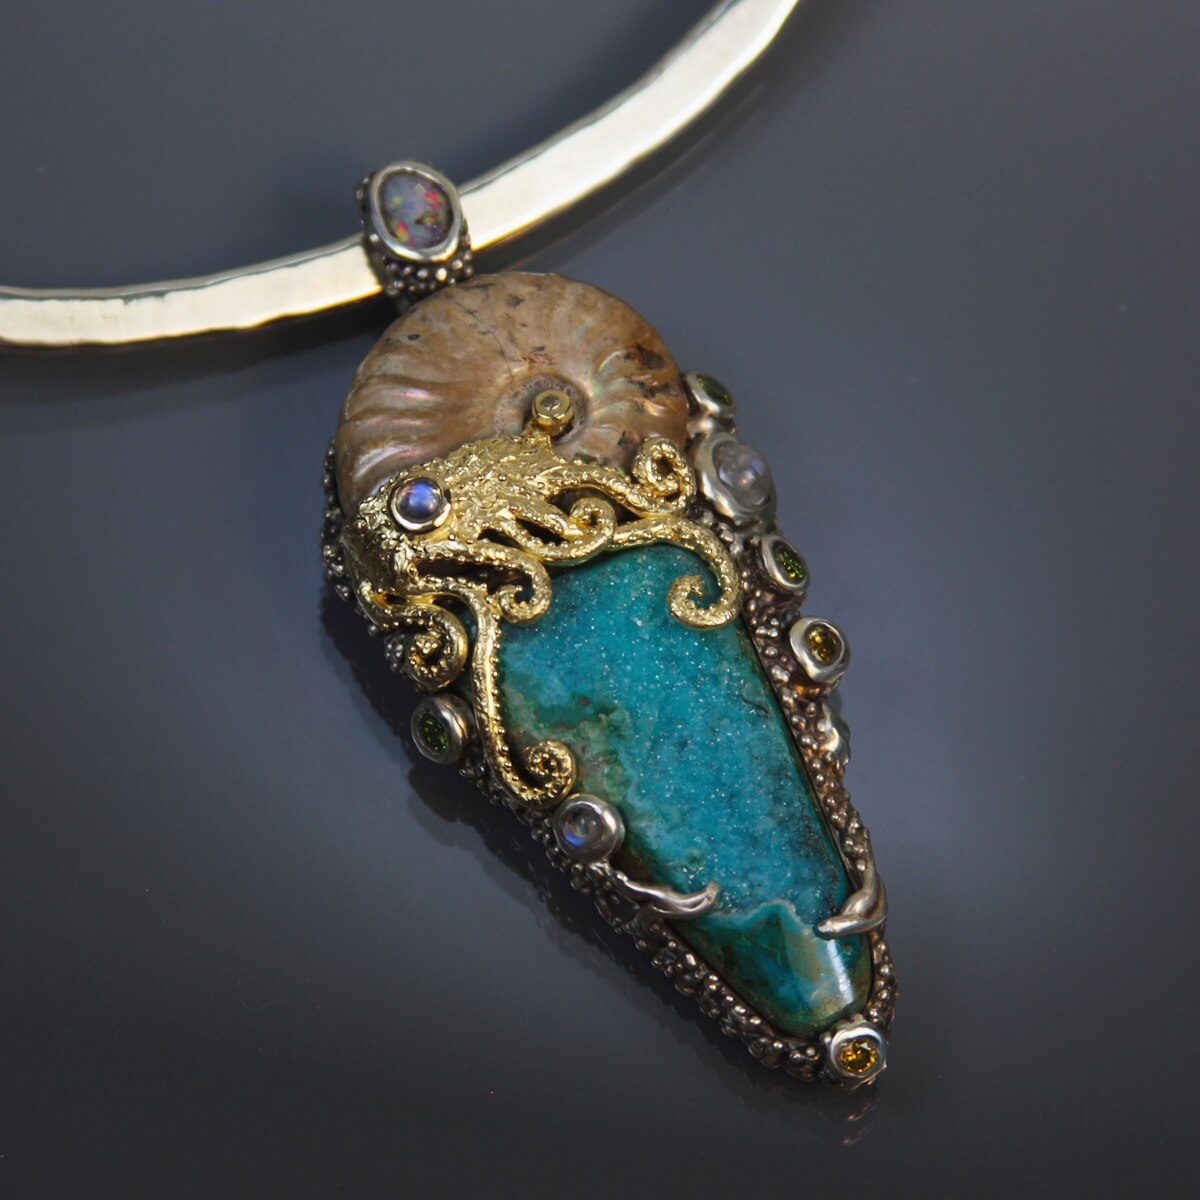 SOLD, Ammonite fossil and drusy quartz on chrysocolla "Jurassic Classic" pendant in sterling silver and 14kt gold with gemstones